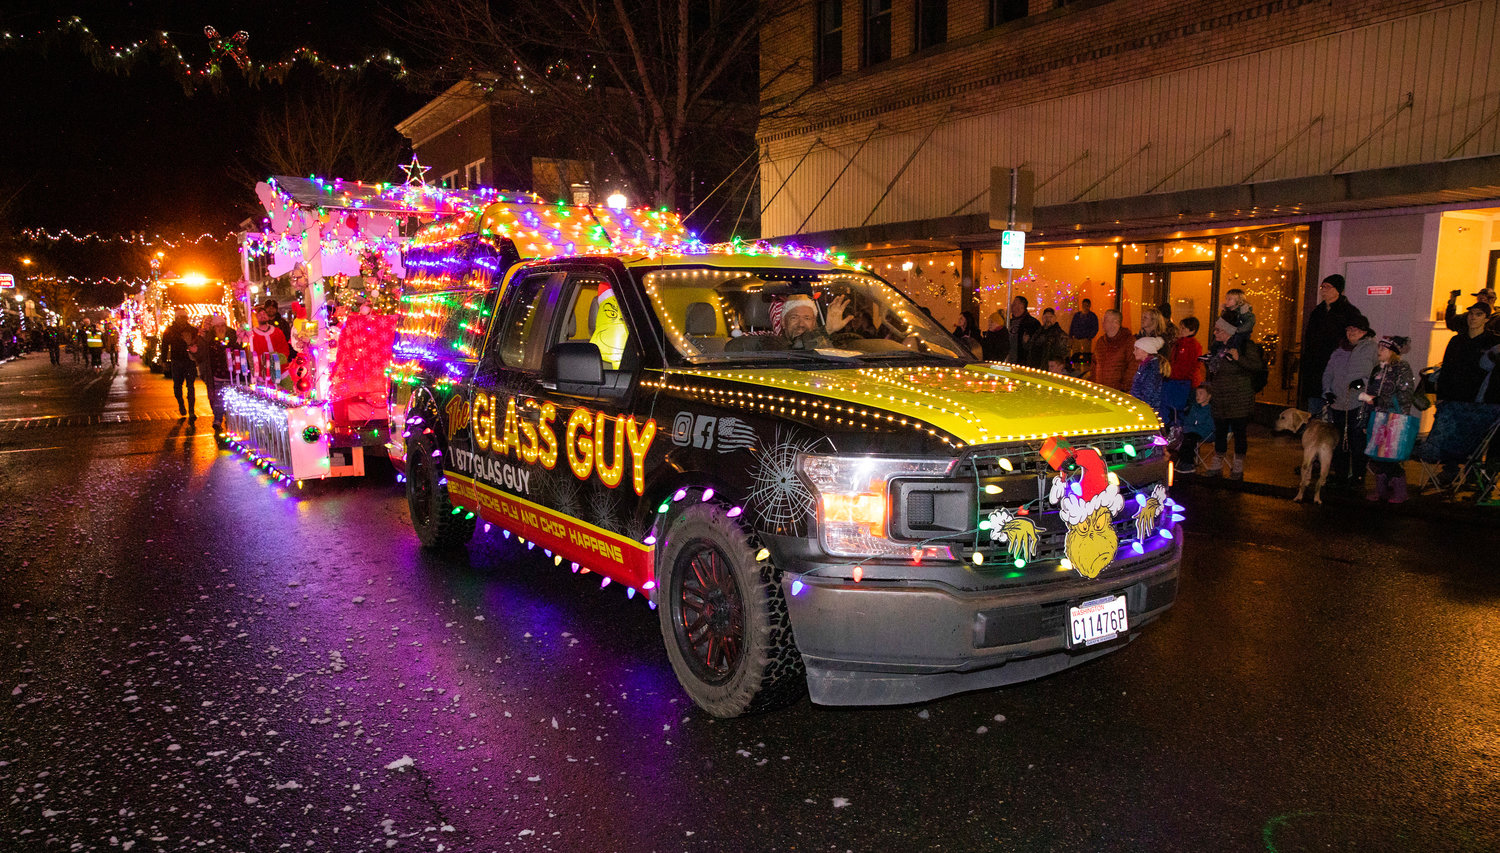 The Glass Guy truck is illuminated Saturday night in downtown Centralia for the Lighted Tractor Parade.